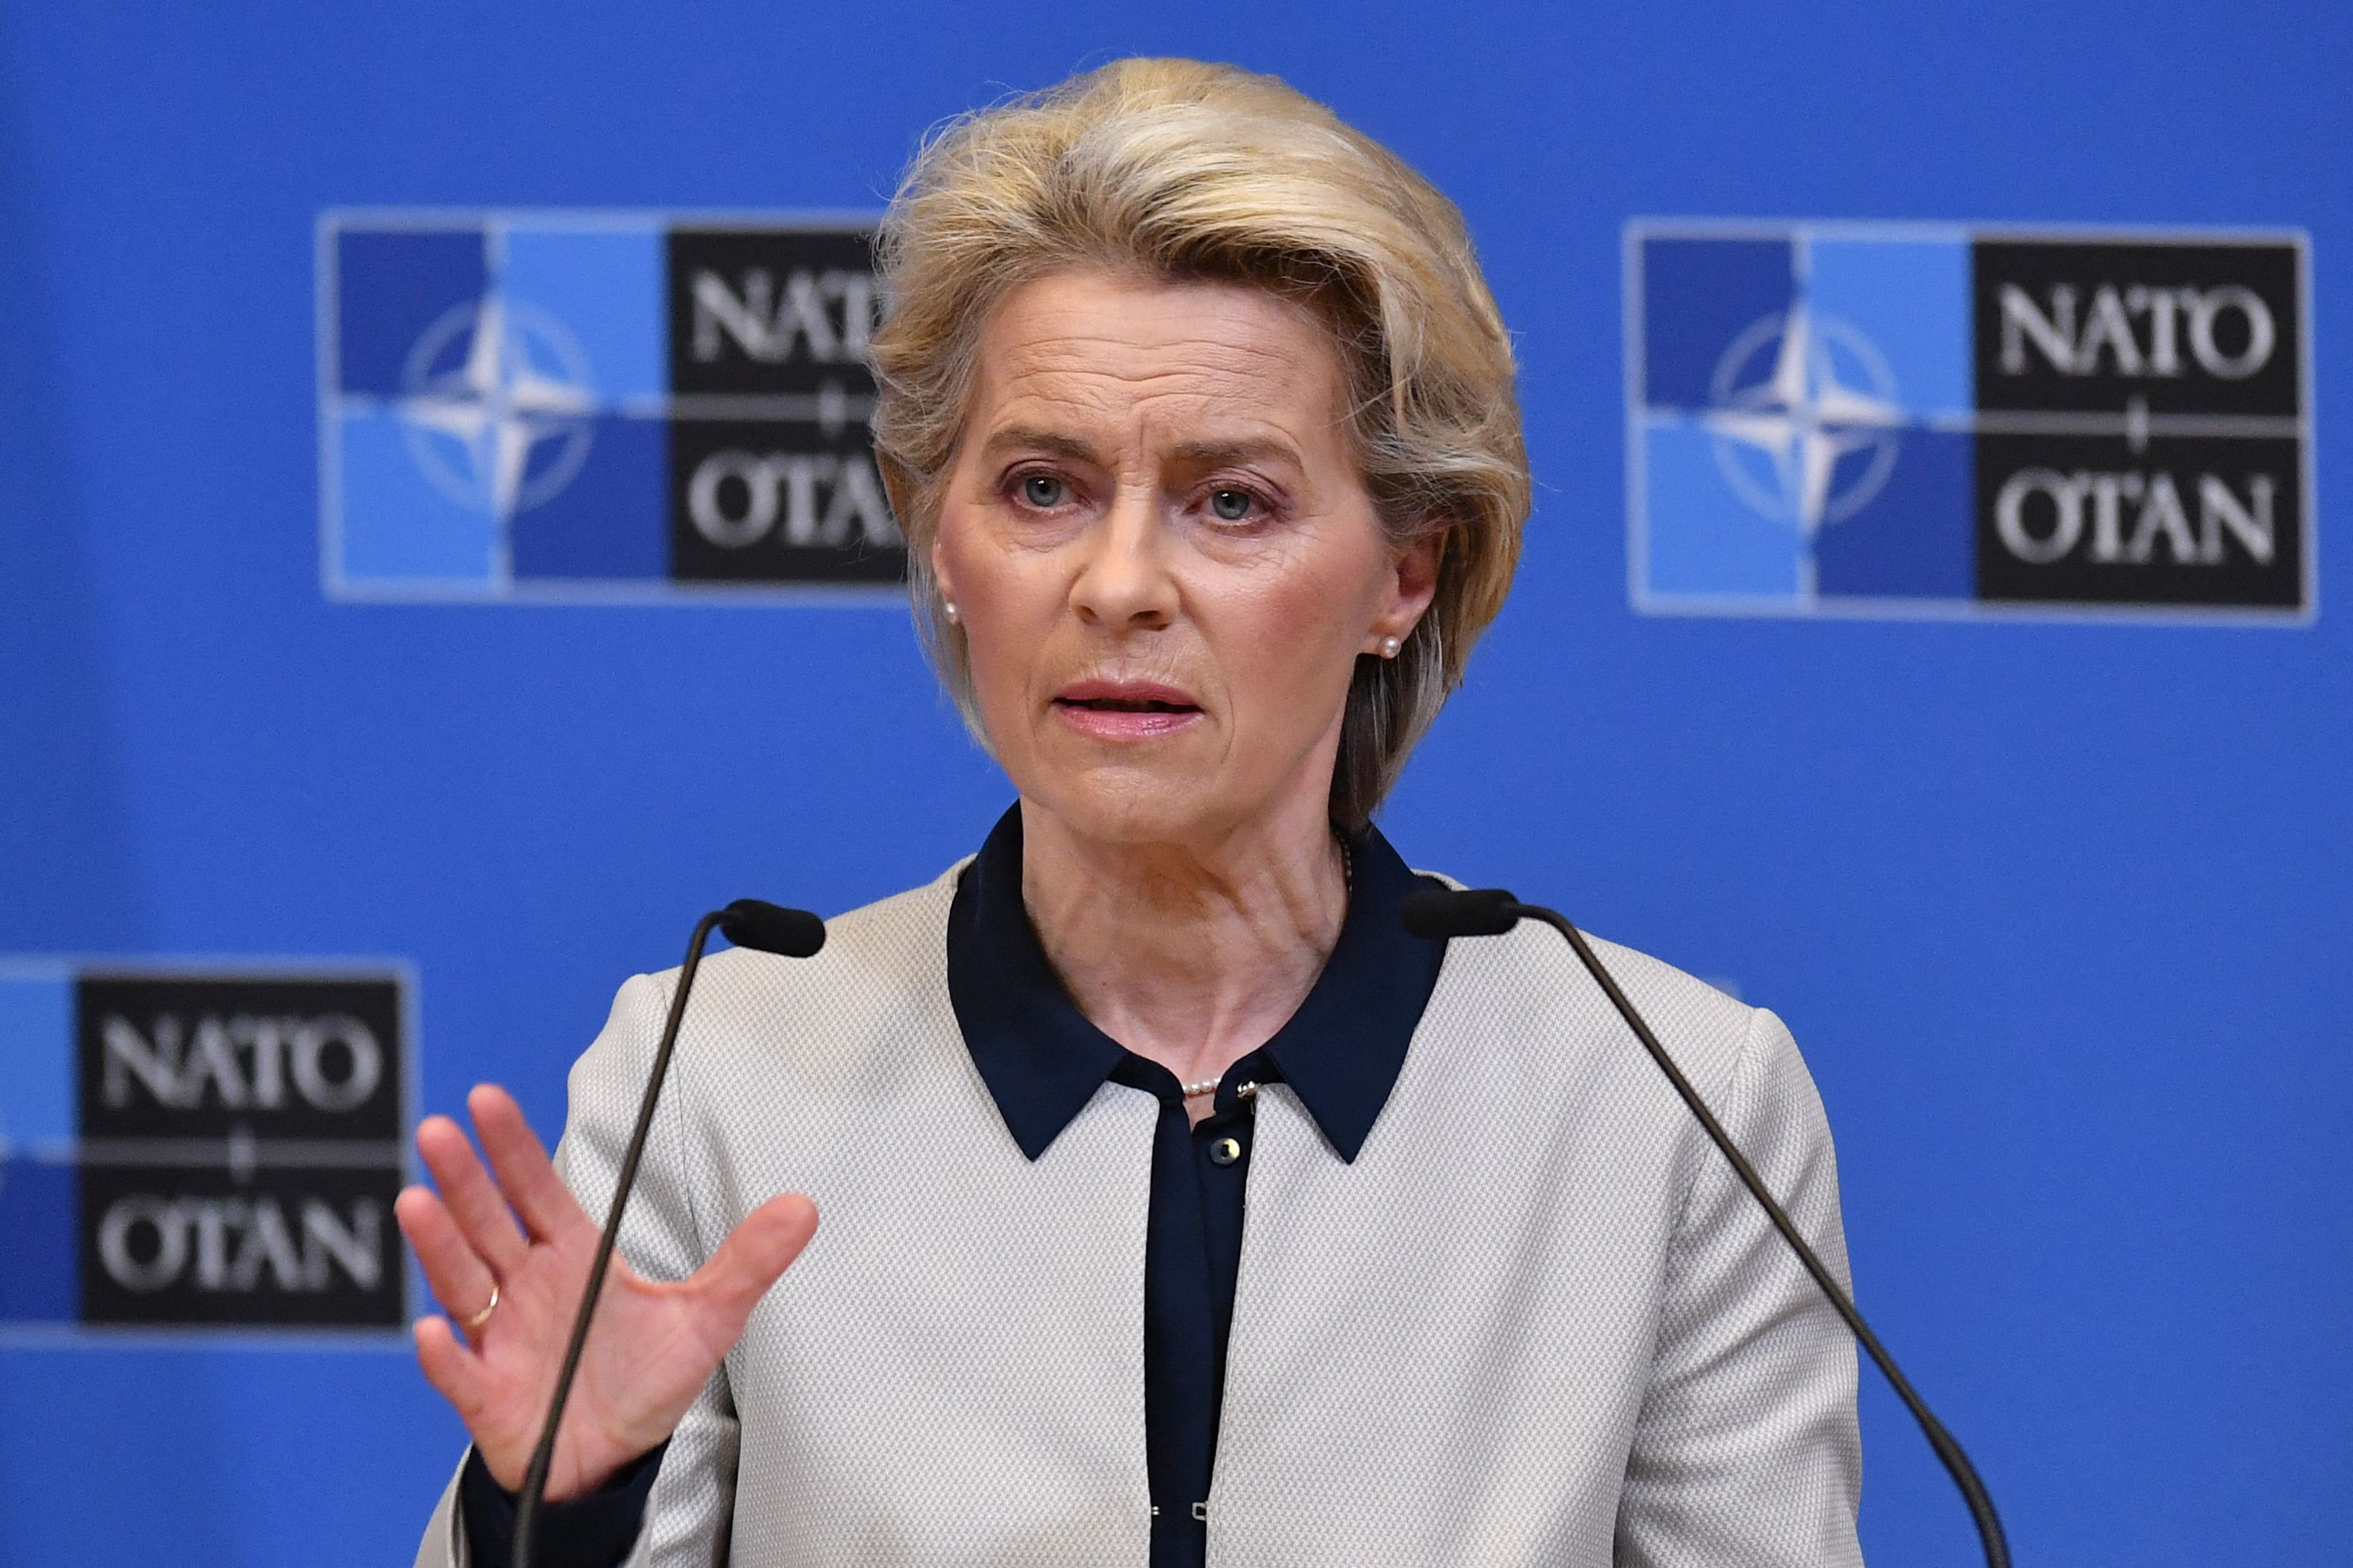 European Commission President Ursula von der Leyen gives a press conference on Russia's military operation in Ukraine after talks with President of the European Council and NATO Secretary General, at NATO headquarters in Brussels, Belgium, on February 24.